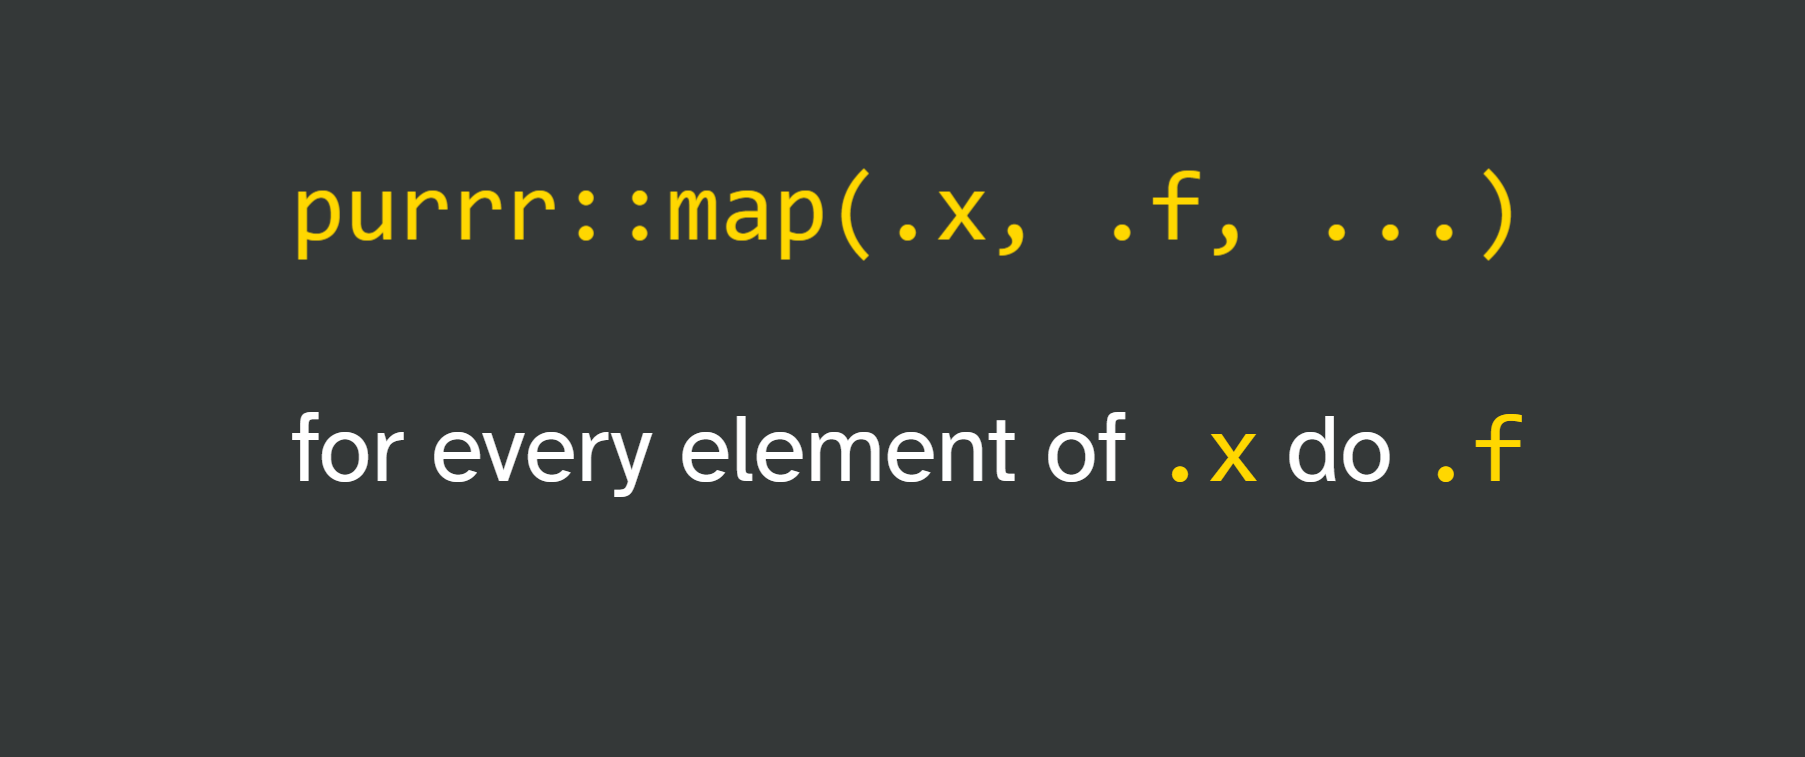 on gray background: purrr::map(.x, .f, ...) for every element of .x do .f